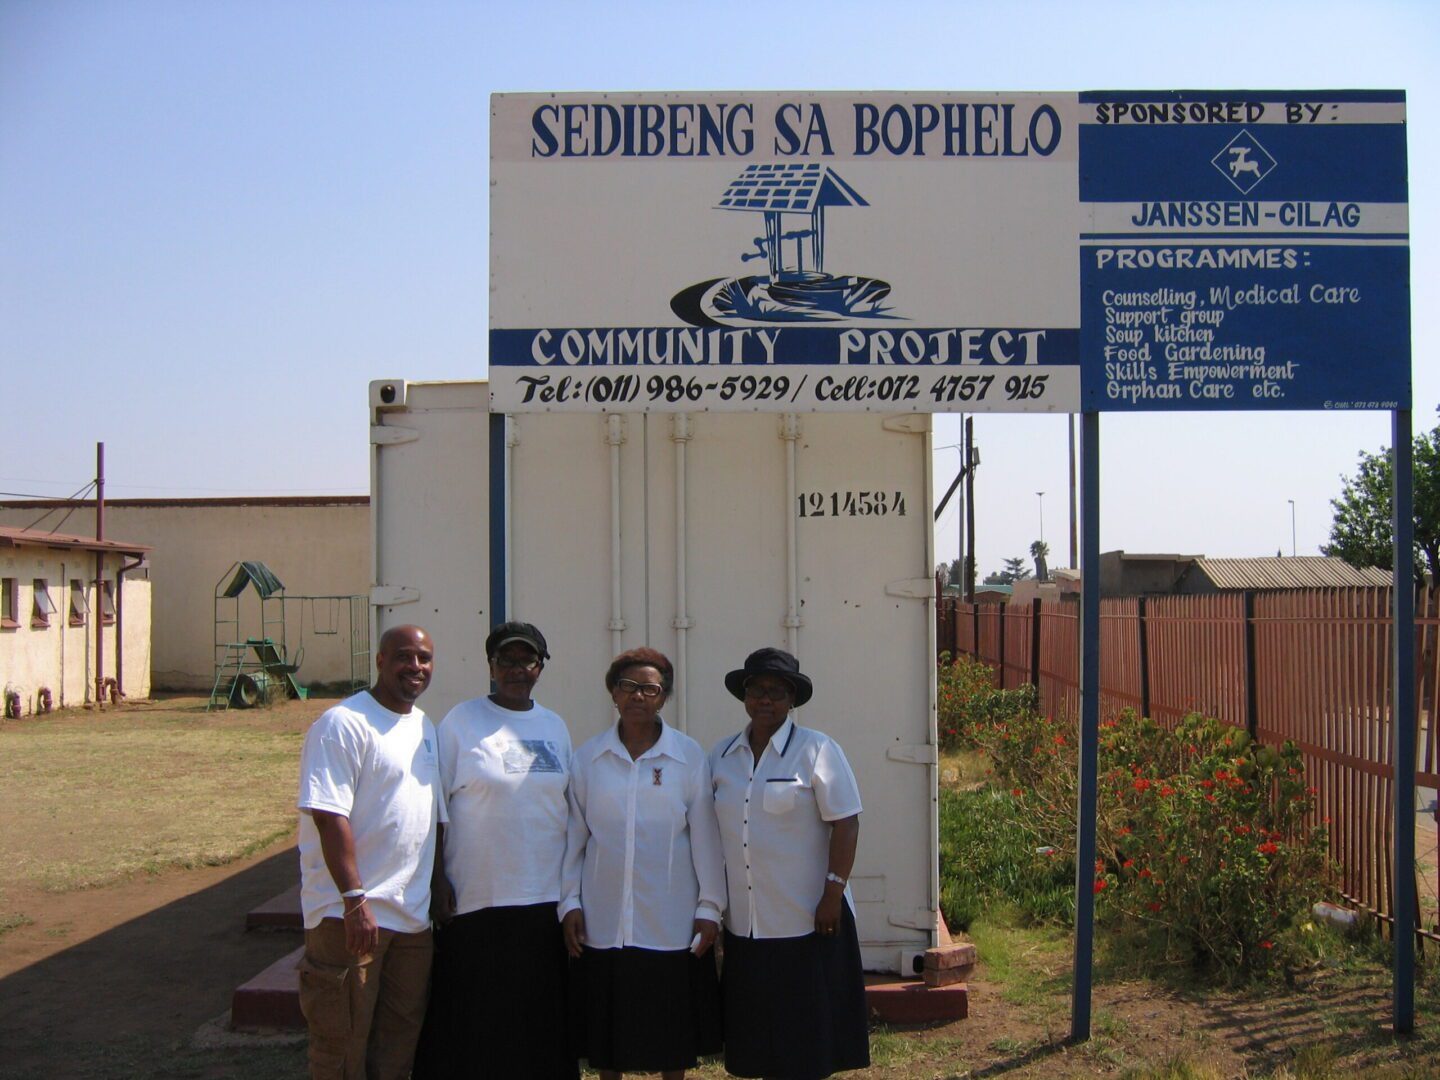 Four people standing in front of a sign.